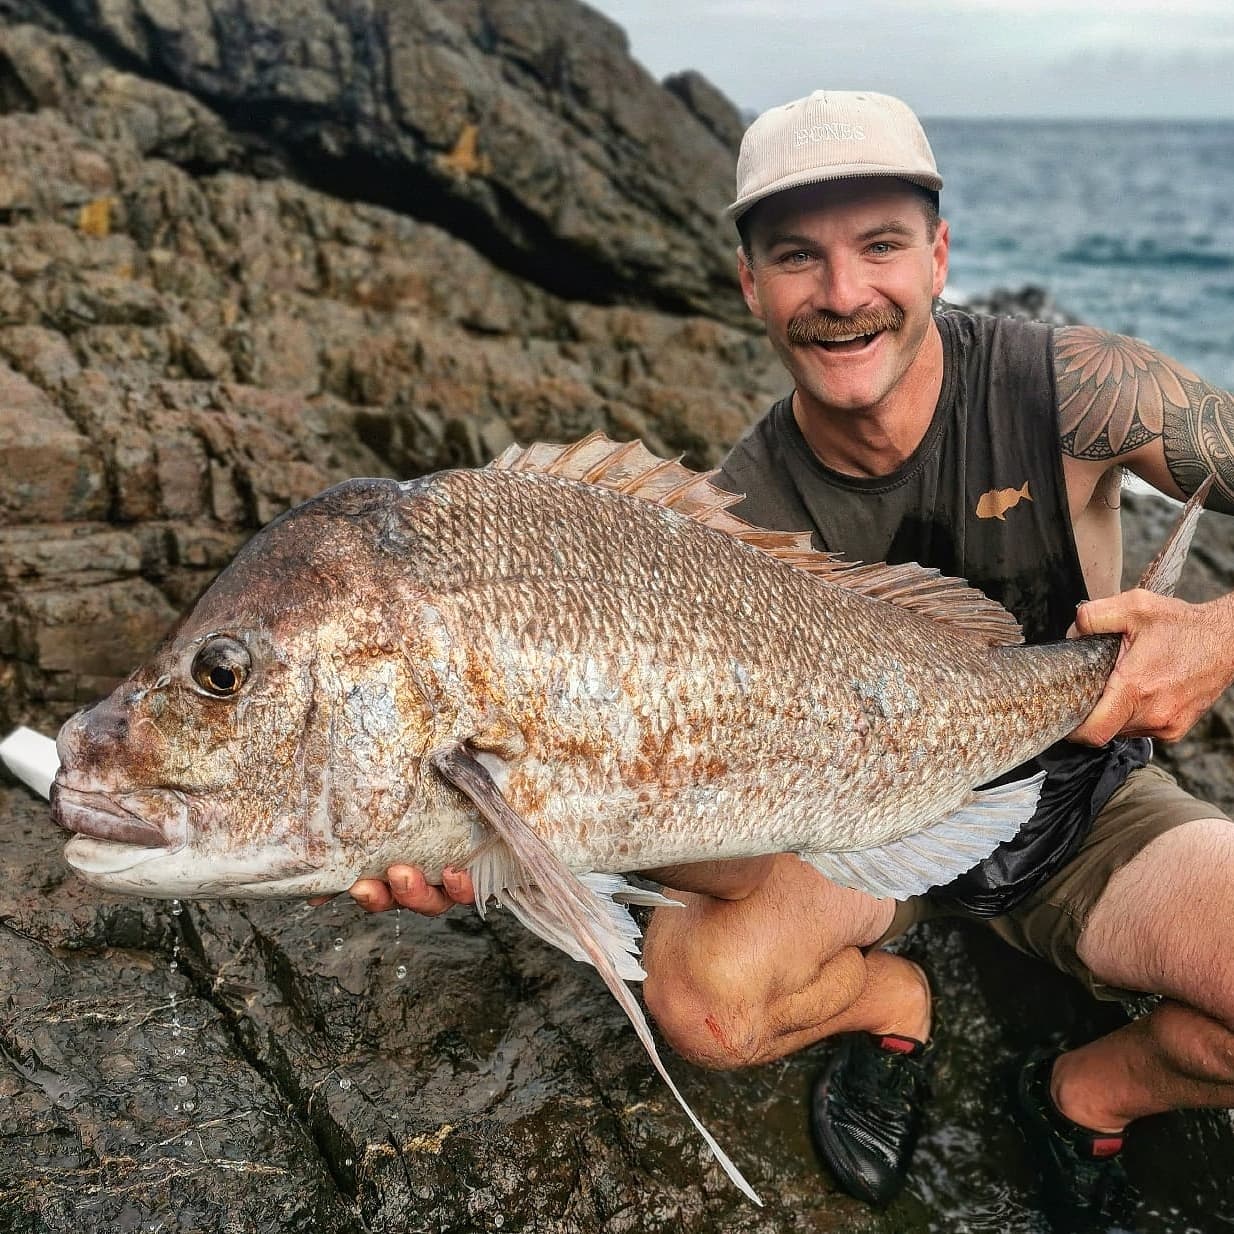 Winter Snapper Tips - How to Catch Snapper During the Cooler